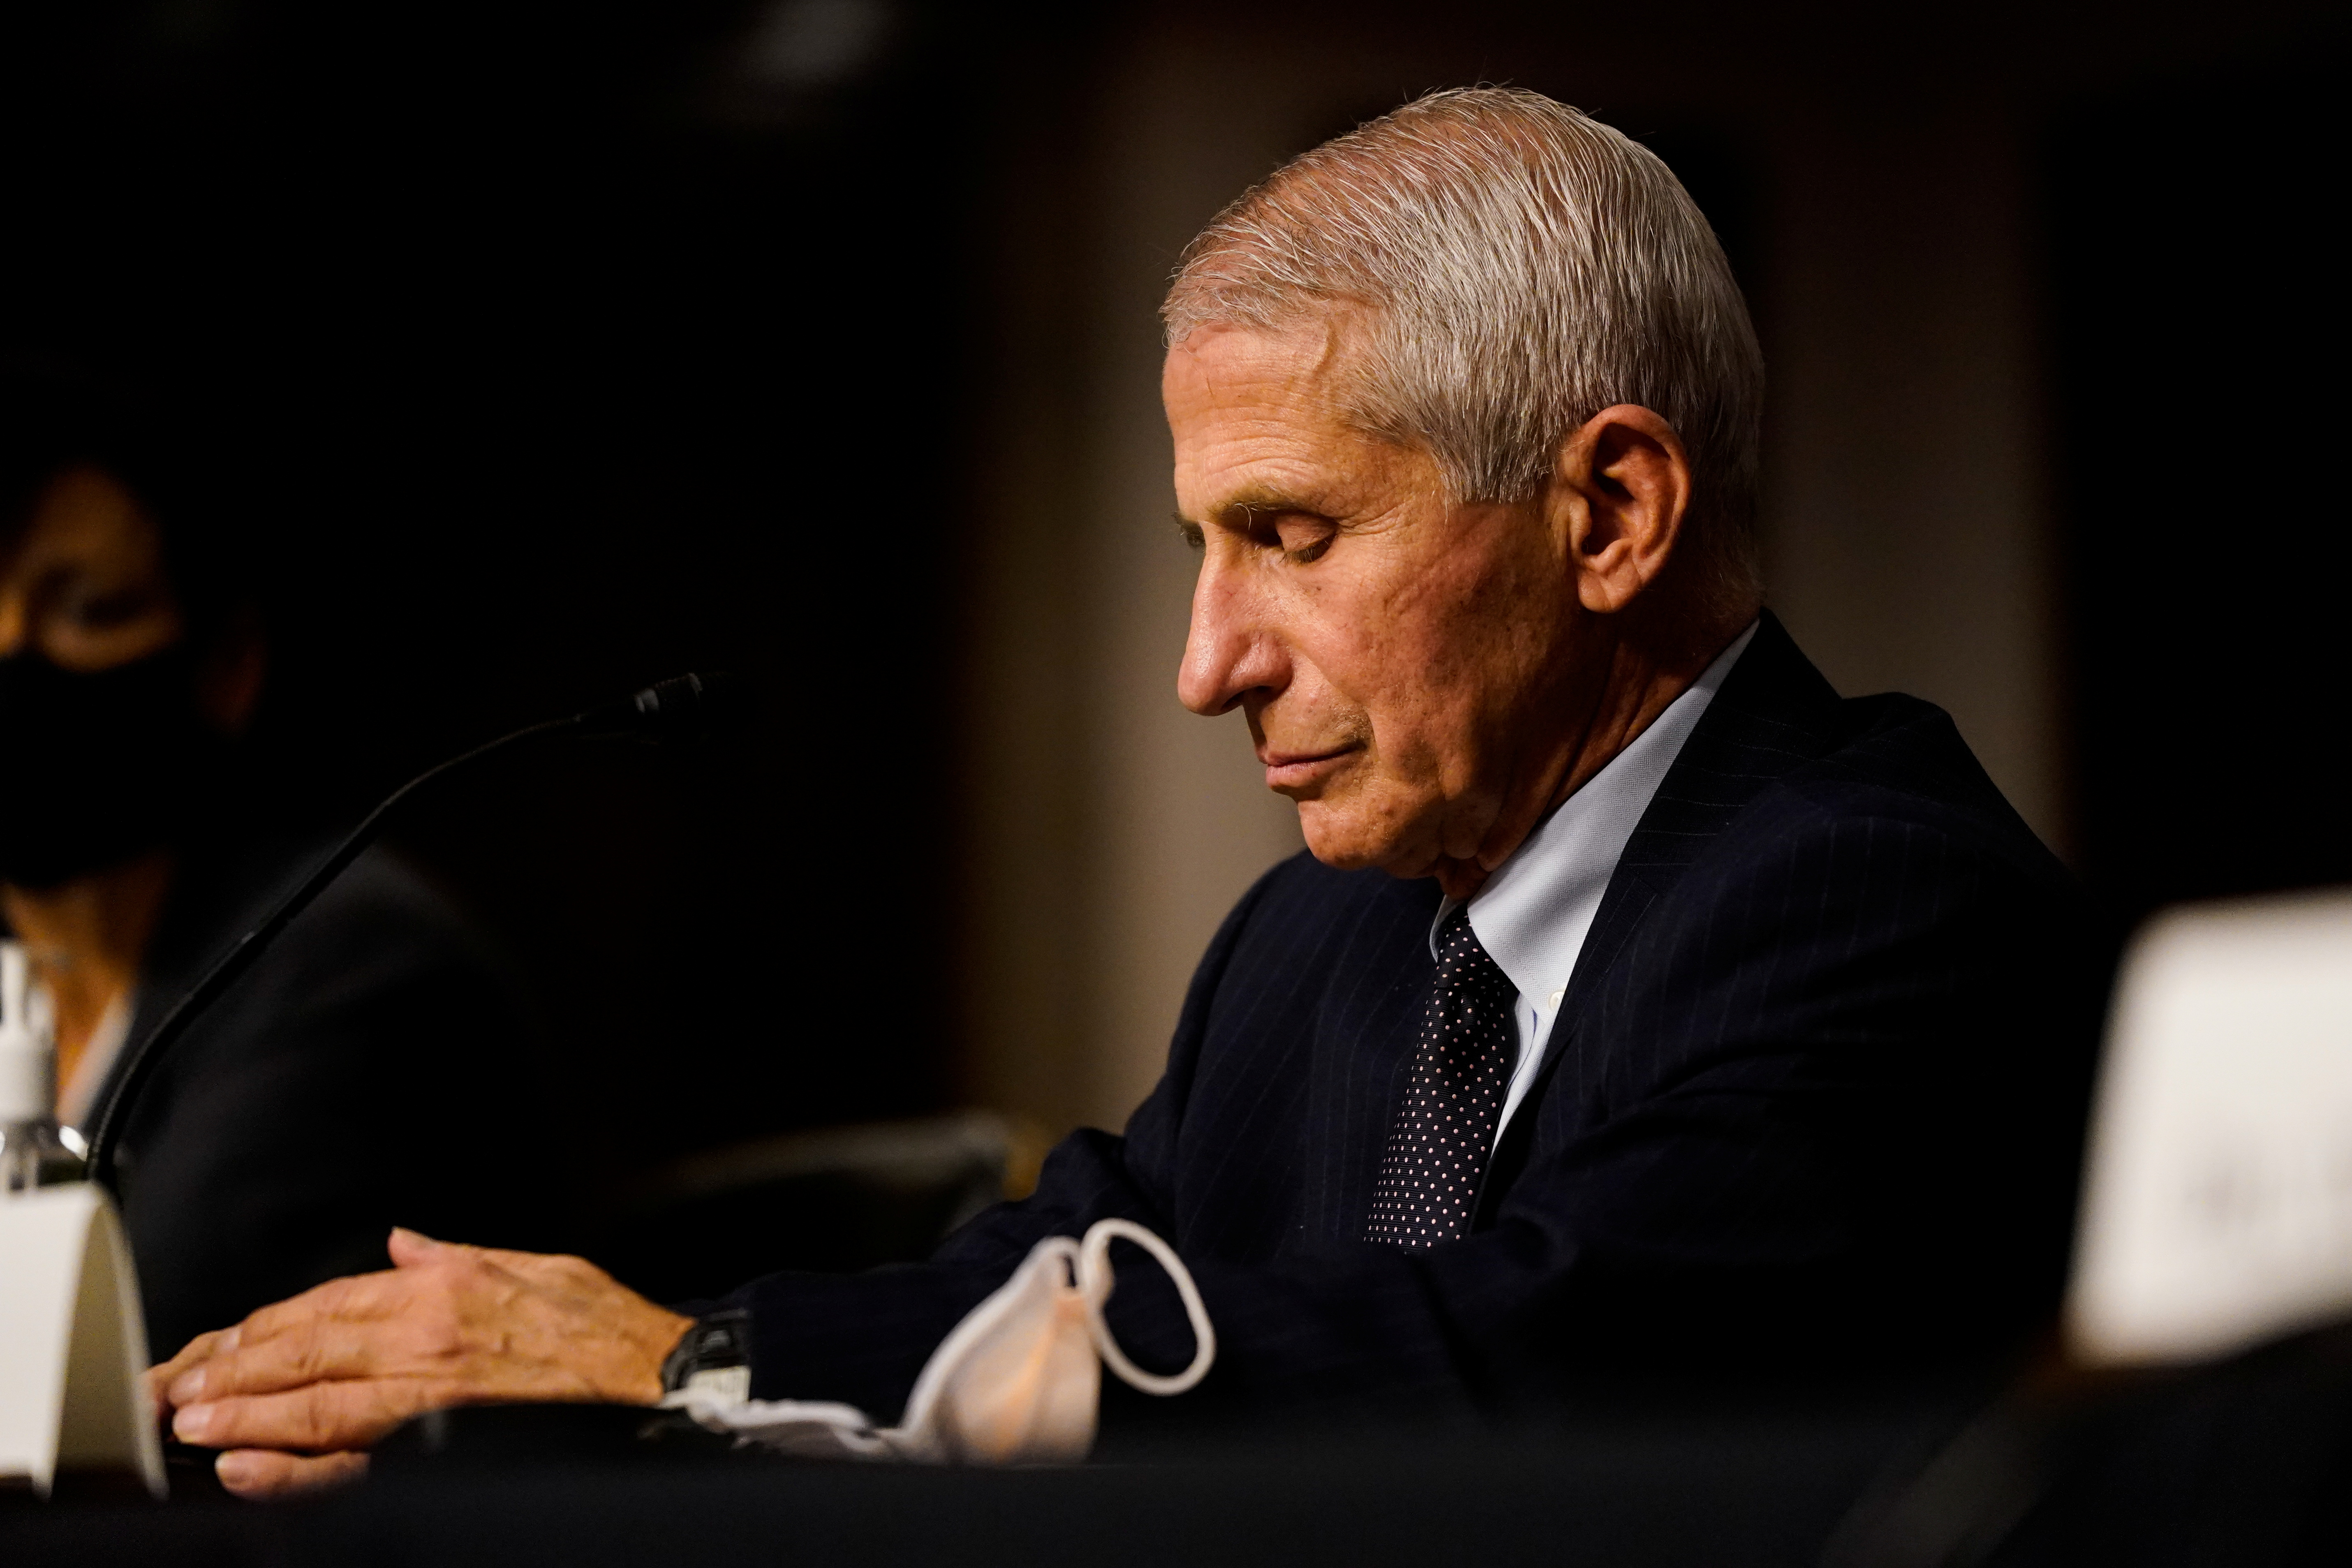 White House Chief Medical Adviser Anthony Fauci listens to other speakers during the Senate Health, Education, Labor and Pensions hearing on 